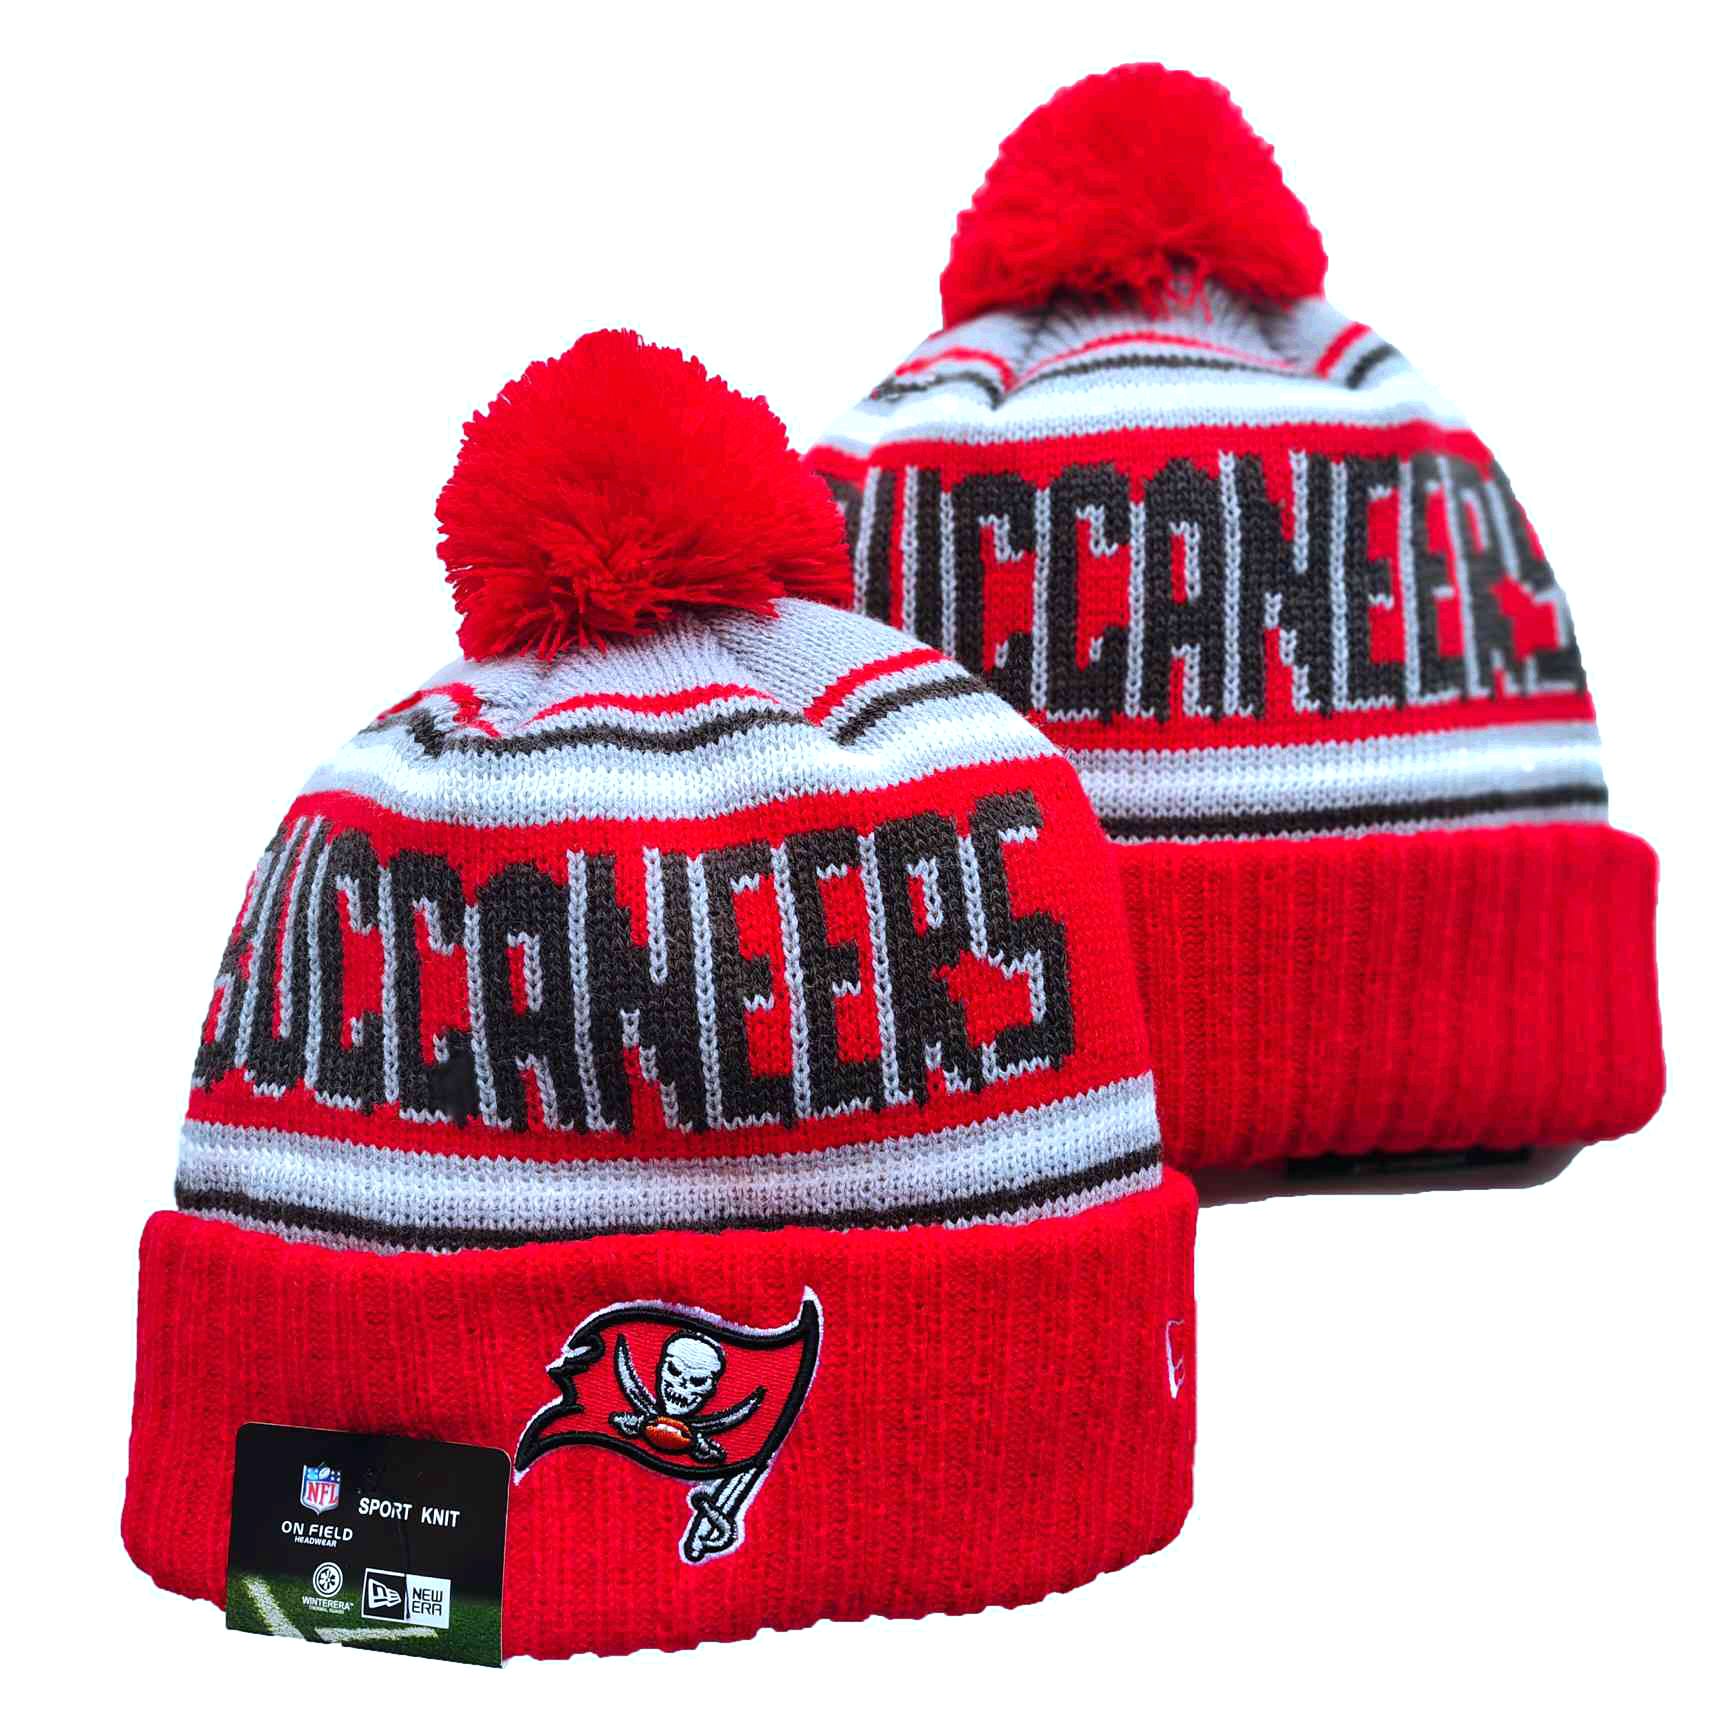 Tampa Bay Buccaneers Knit Hats -4